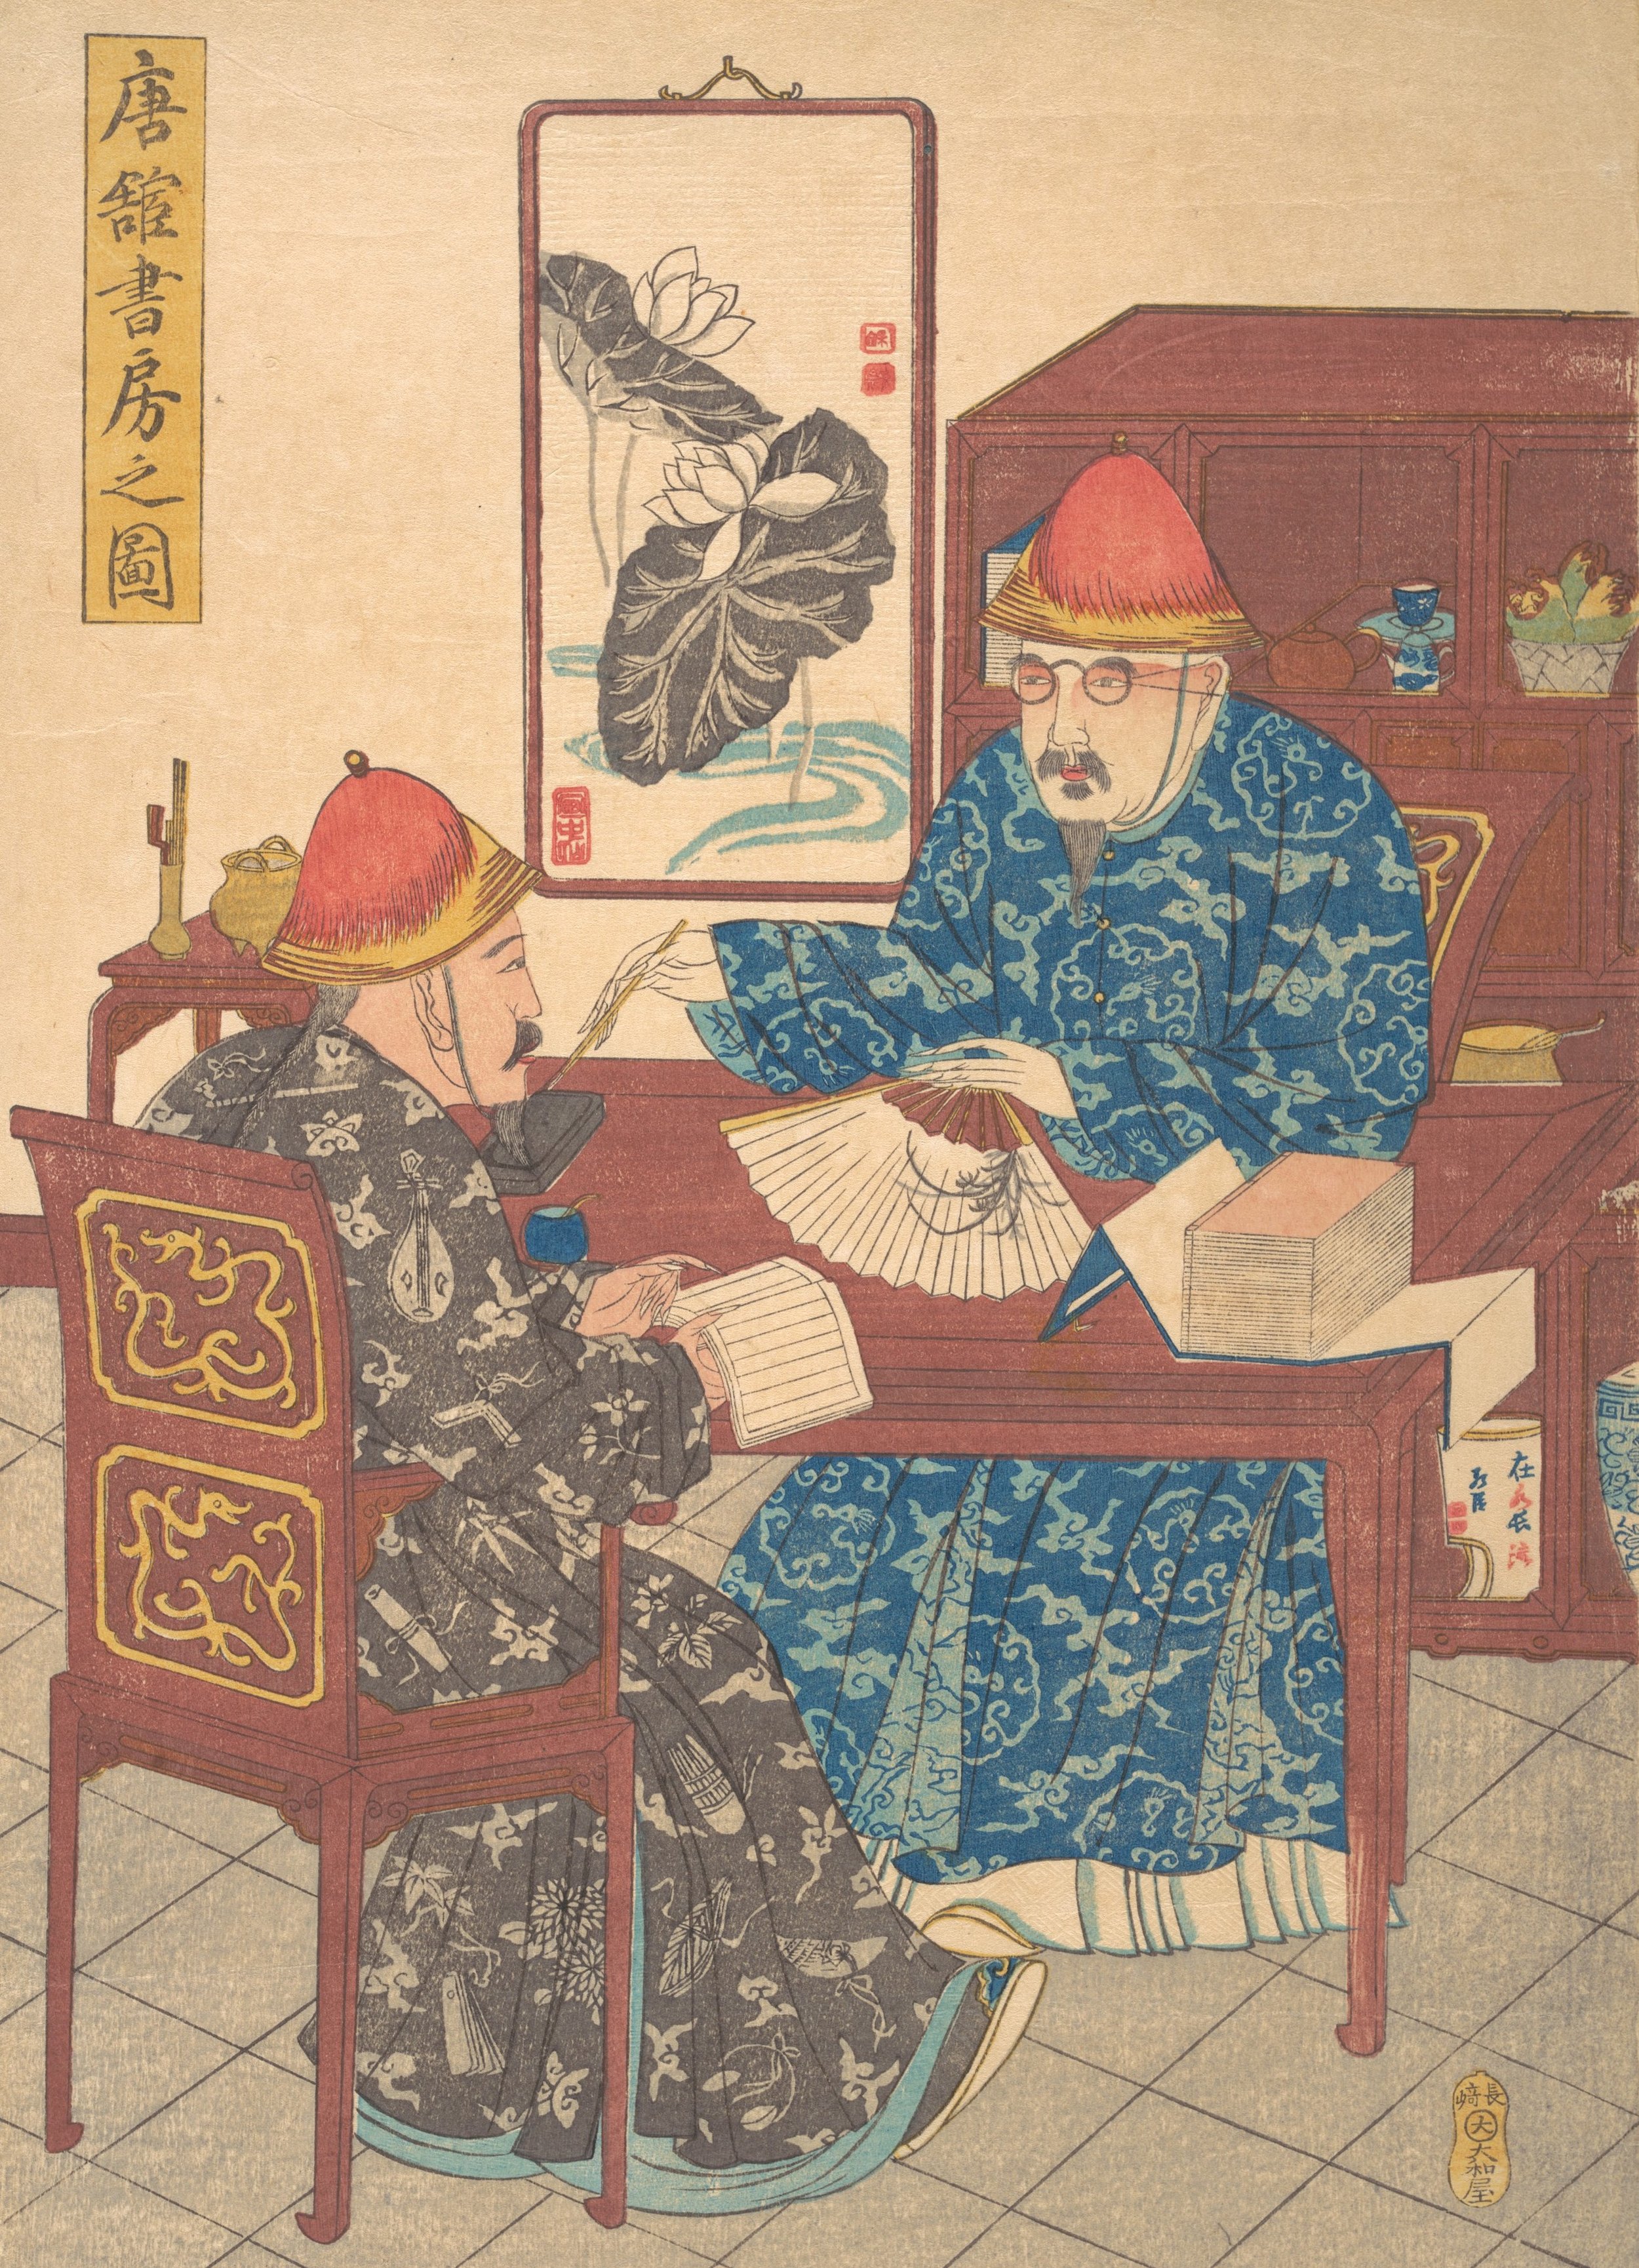 Two Chinese Scholars Practicing Calligraphy in Their Studio